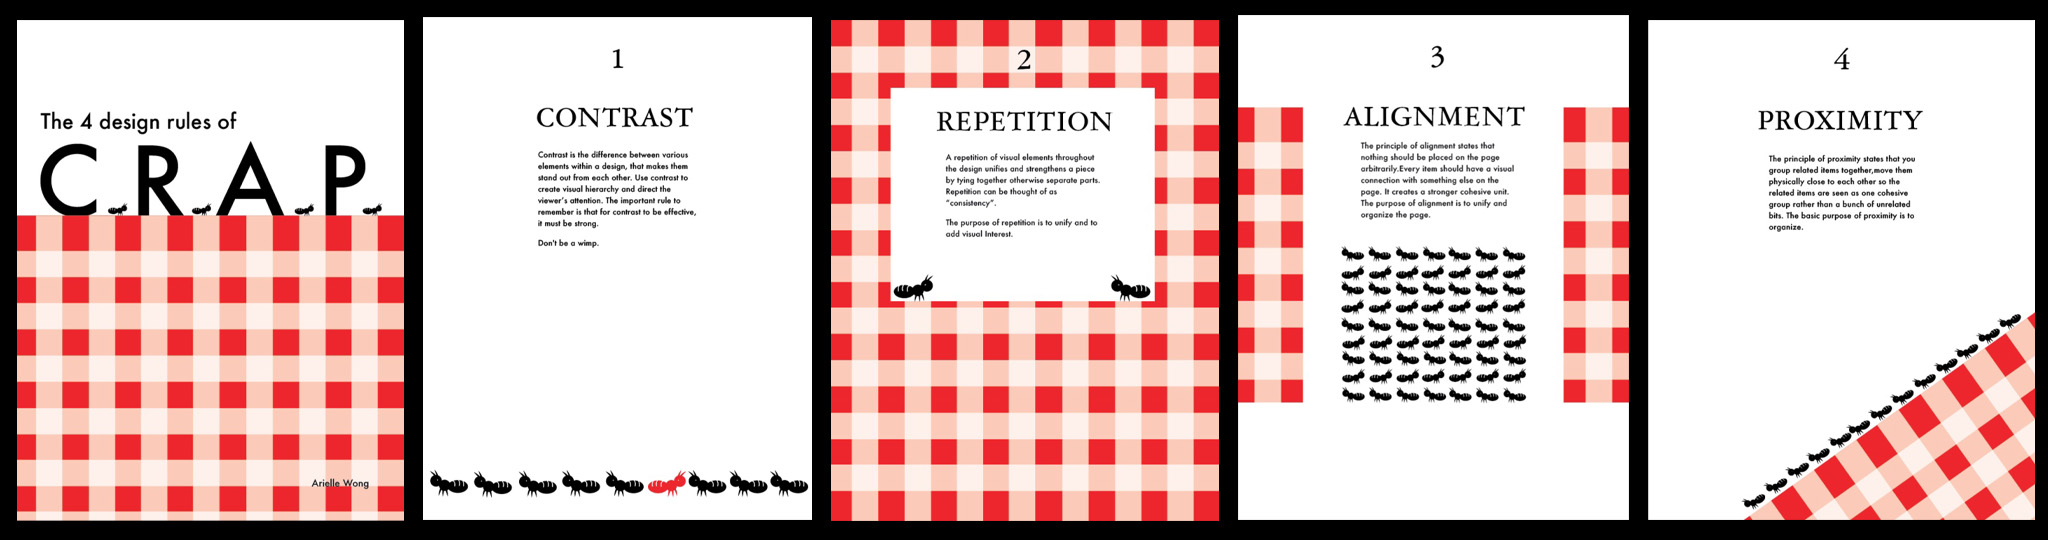 All pages of the booklet. They explain the four design rules: Contrast, Repetition, Alignment and Proximity.